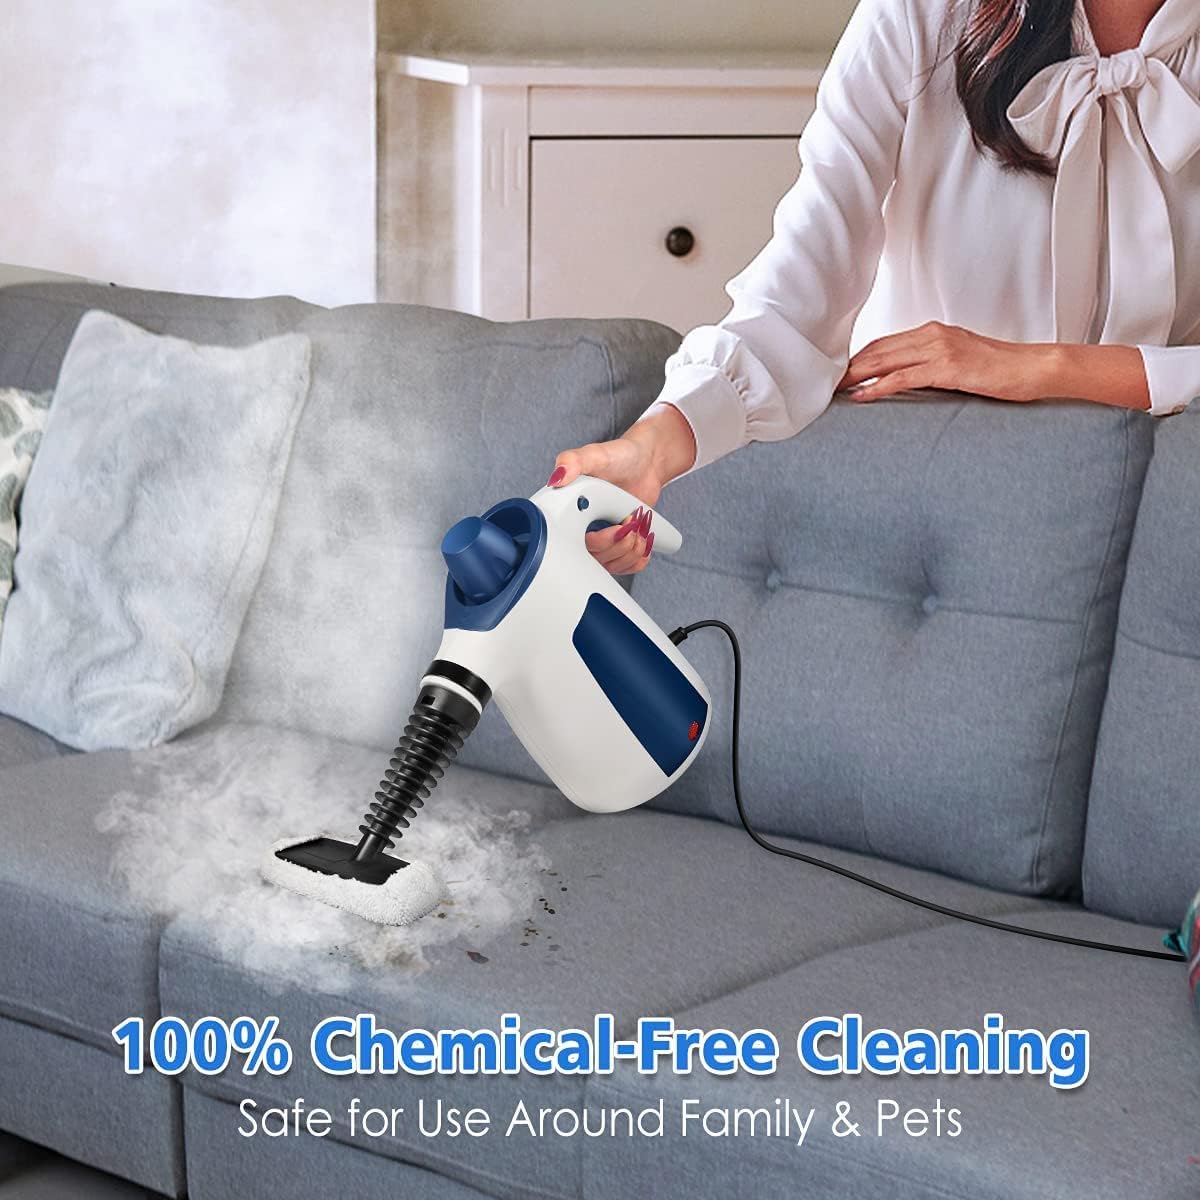 Logkern Handheld Steam Cleaner, Multi-Surface All Natural Pressurized  Steamer for Cleaning, Portable Upholstery Steamer Cleaner with 9-Piece  Accessories for Home Use, Kitchen, Bathroom, Car Detailing, Floor